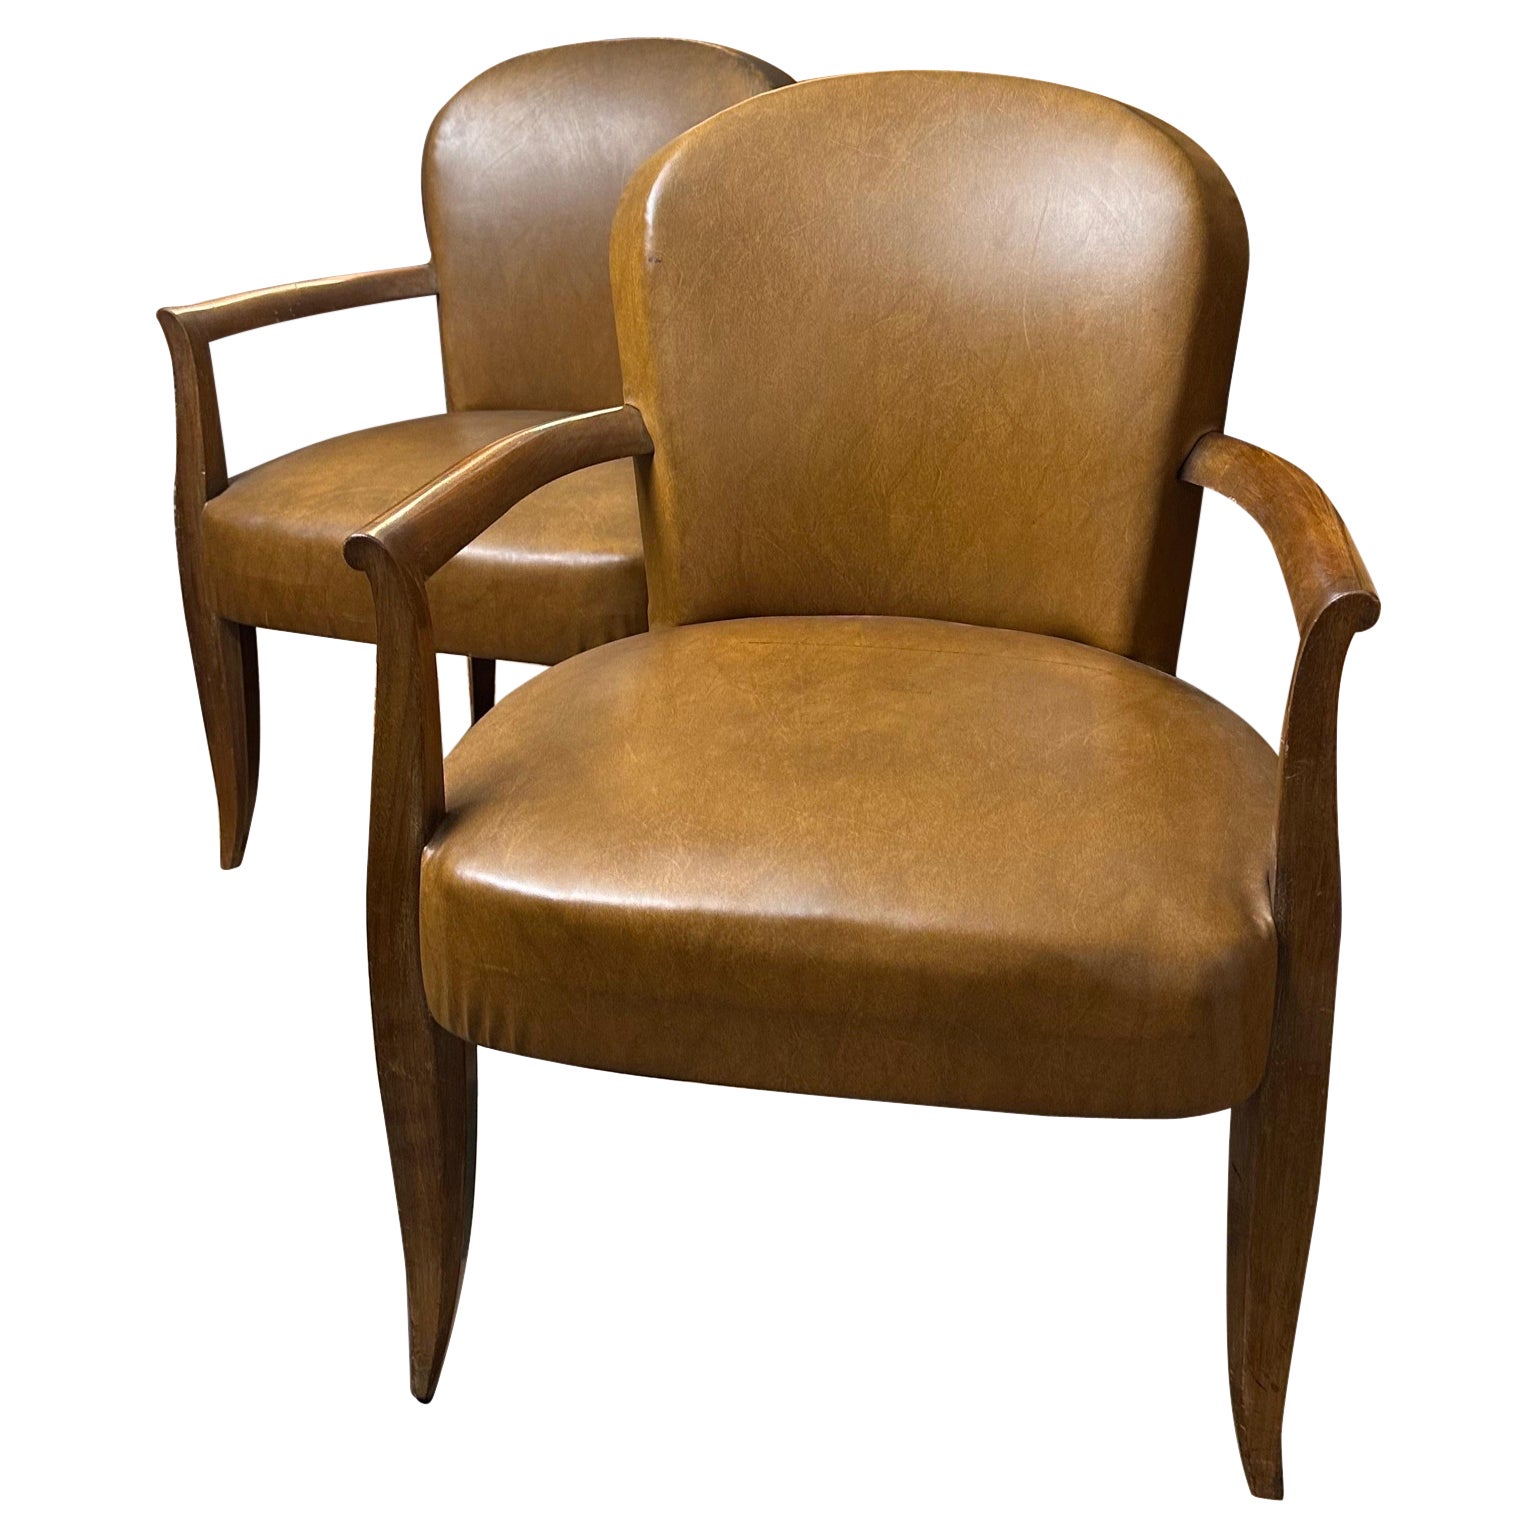 A pair of art deco armchairs